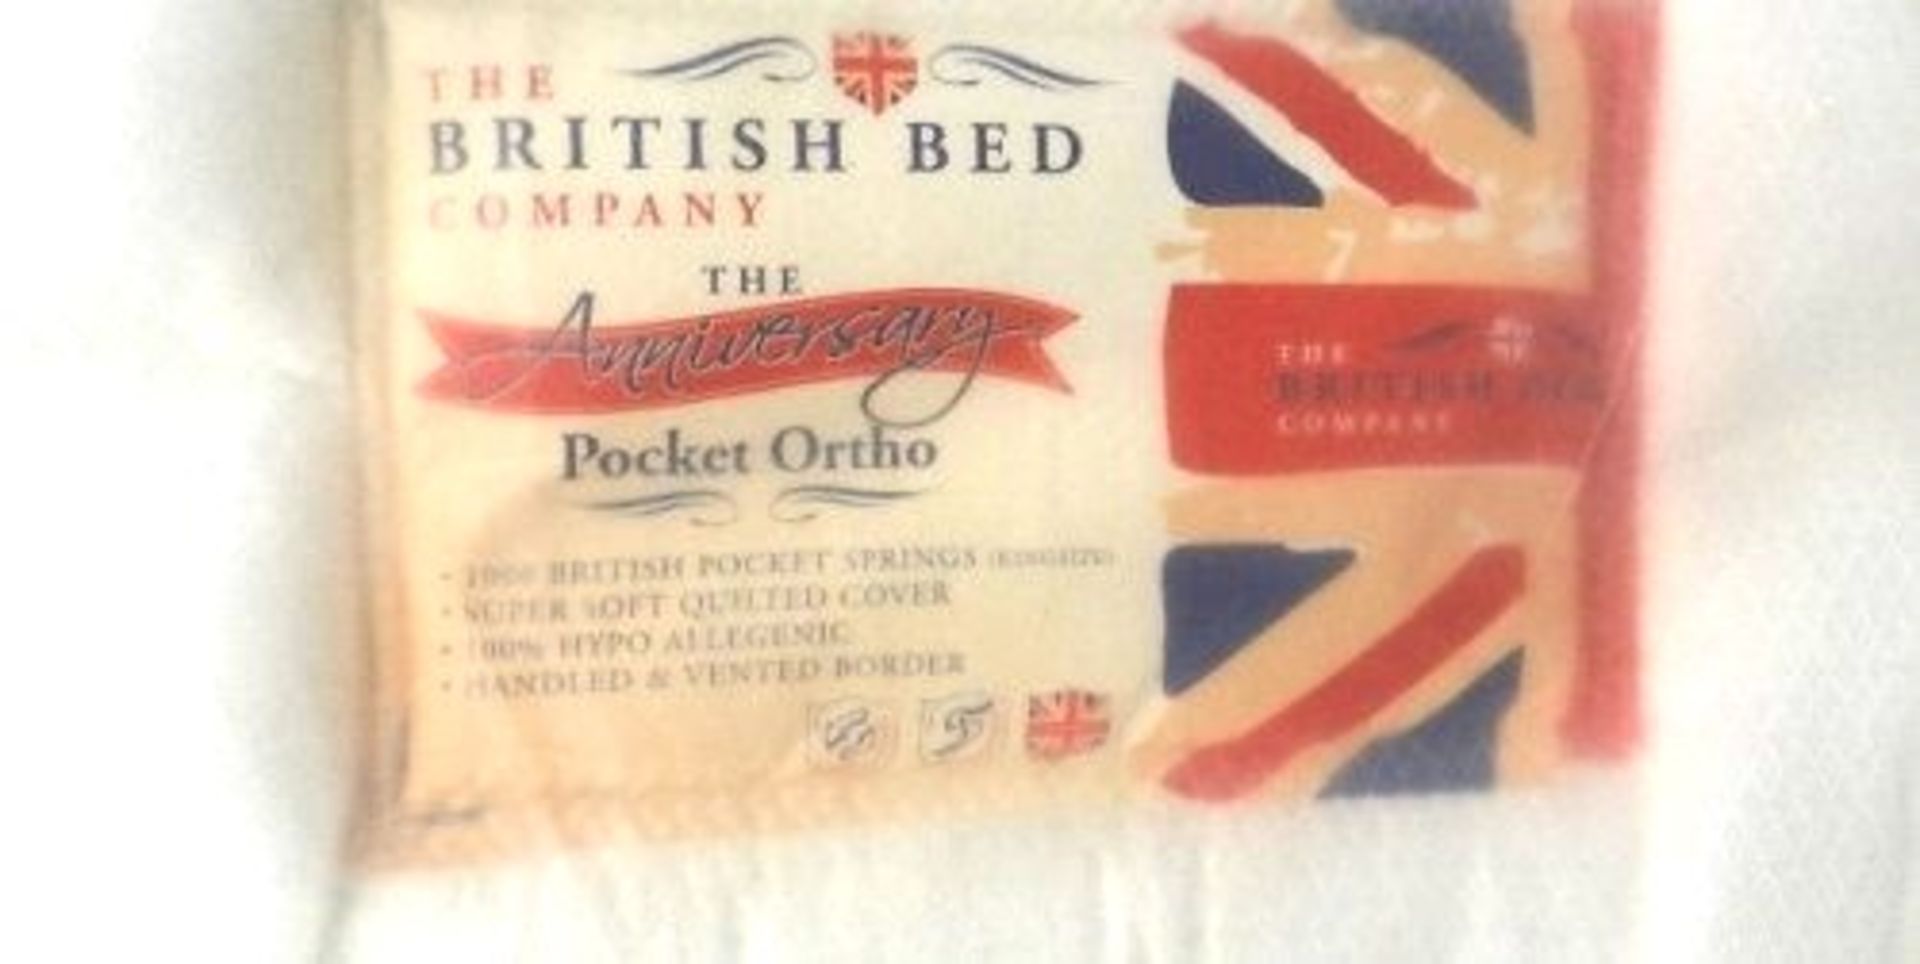 1 x The British Bed Company The Anniversary Pocket Ortho king size mattress - New but slightly dirty